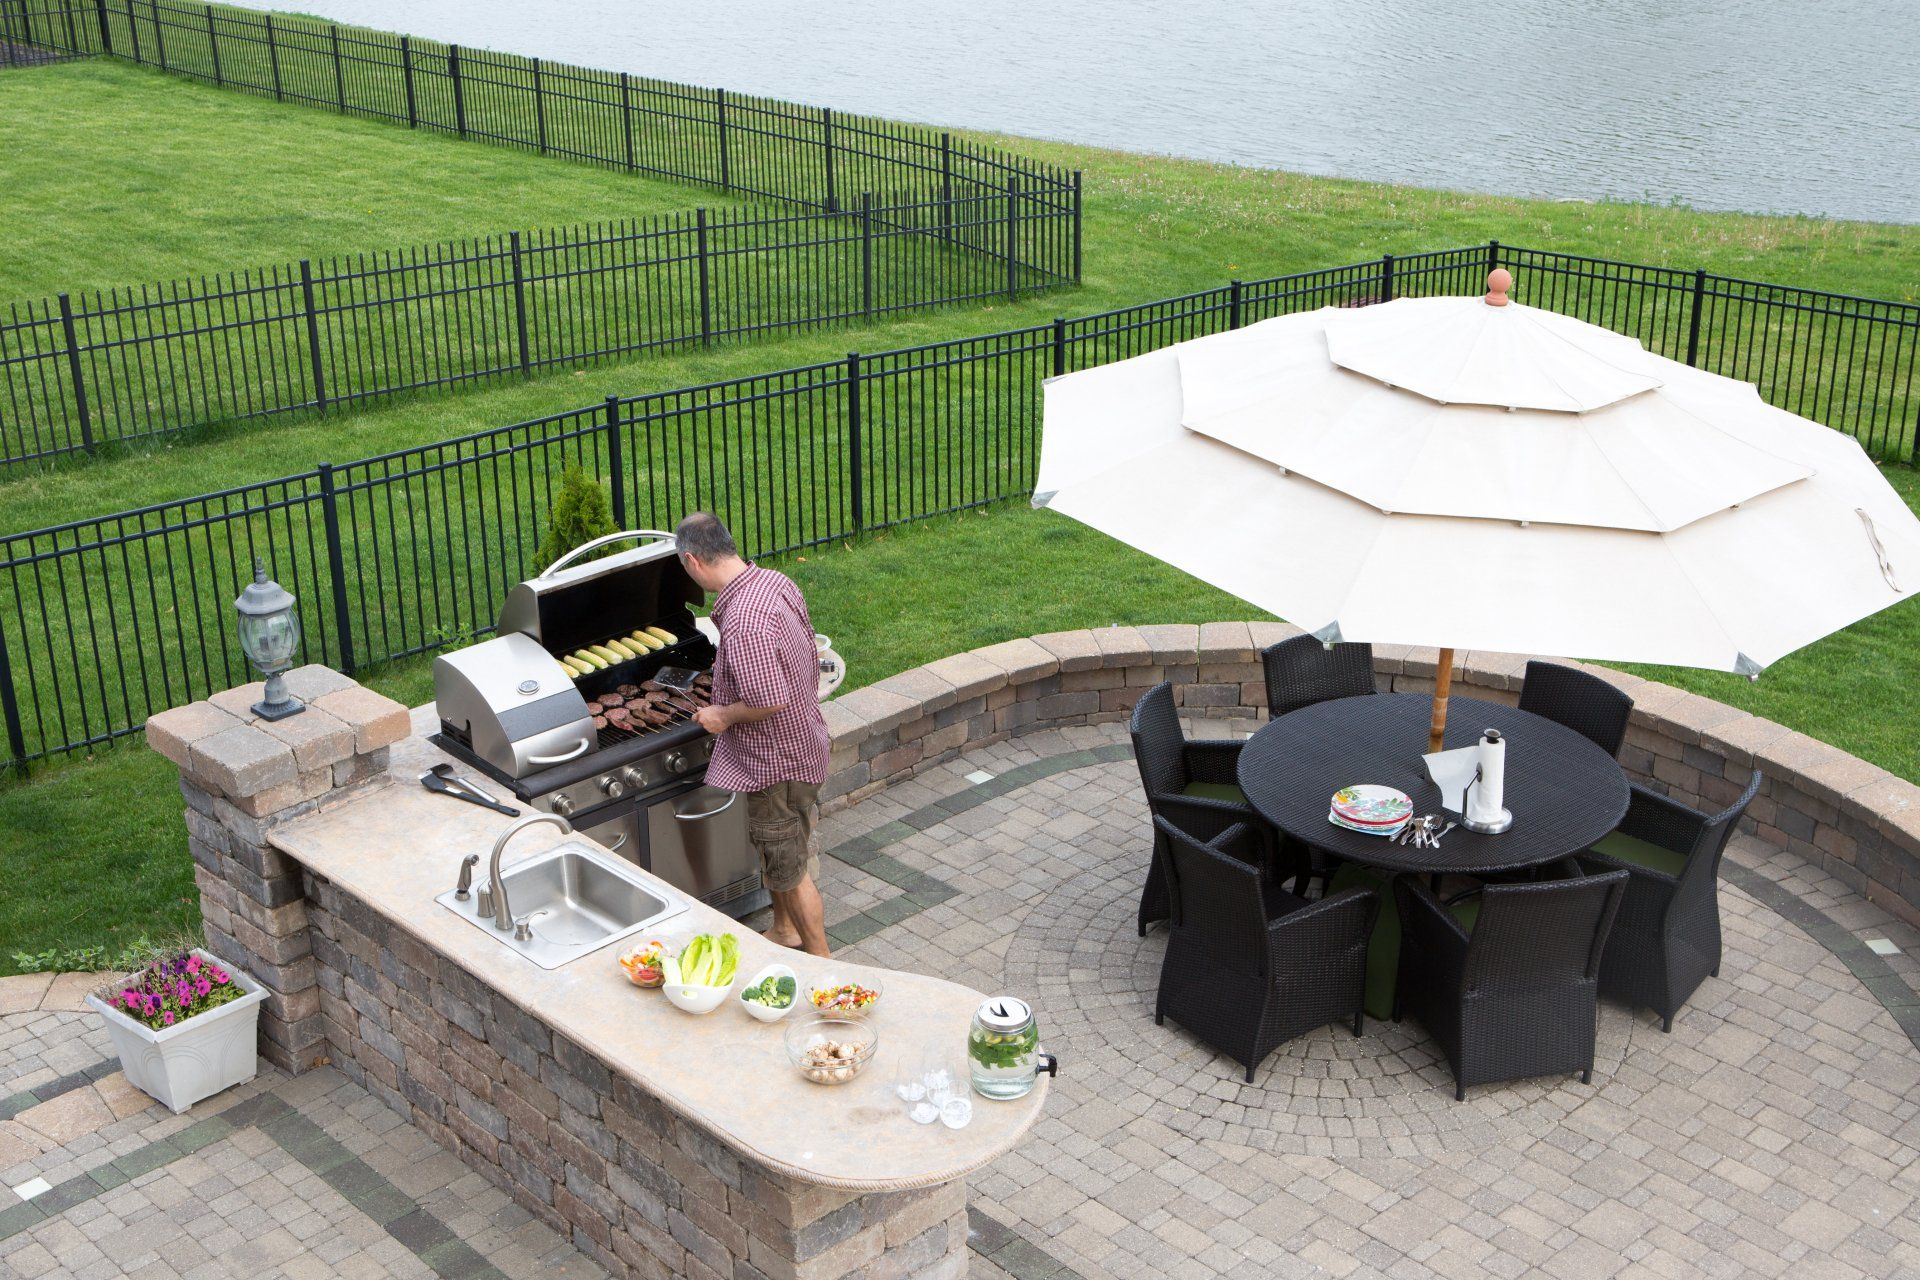 Paver Patio & Outdoor Kitchen in Residential Backyard